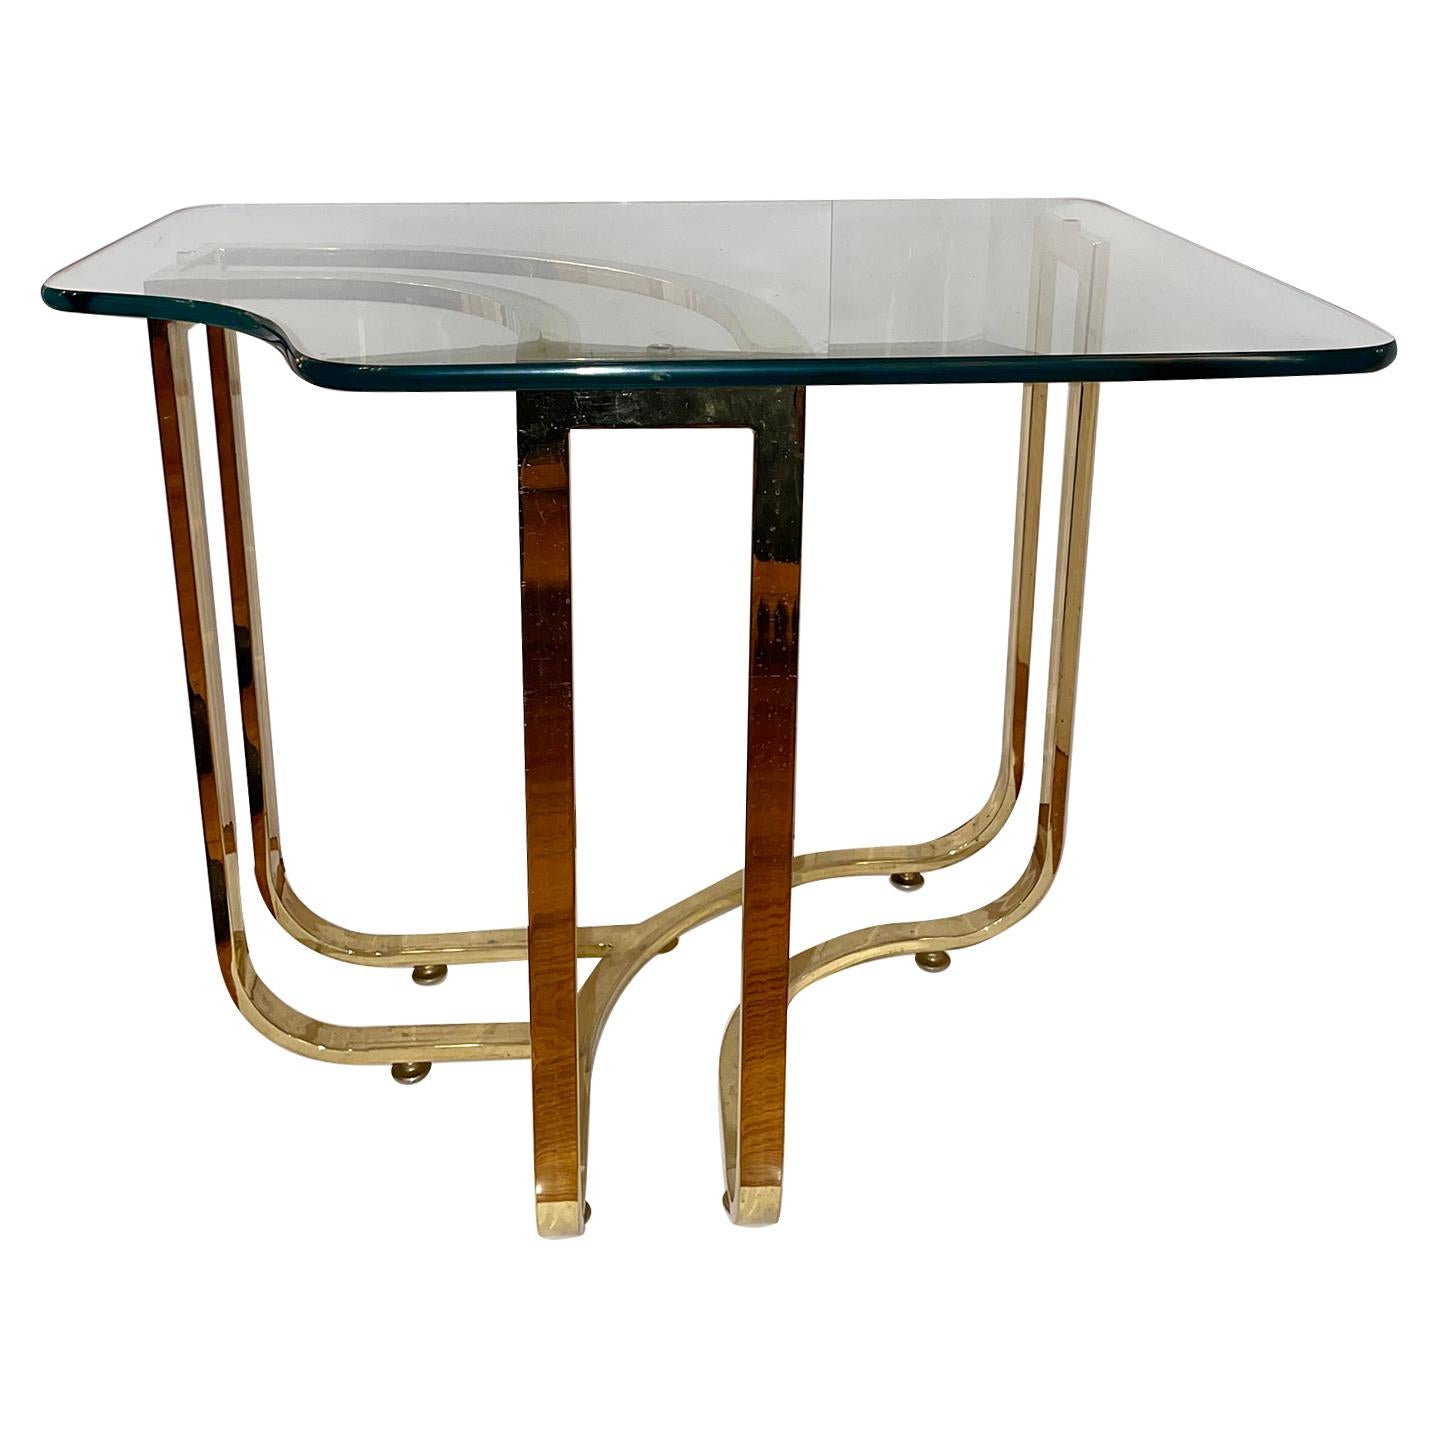 Pair of Moderne style circa 1960’s Italian side tables with glass tops.

Measurements:
Height: 23